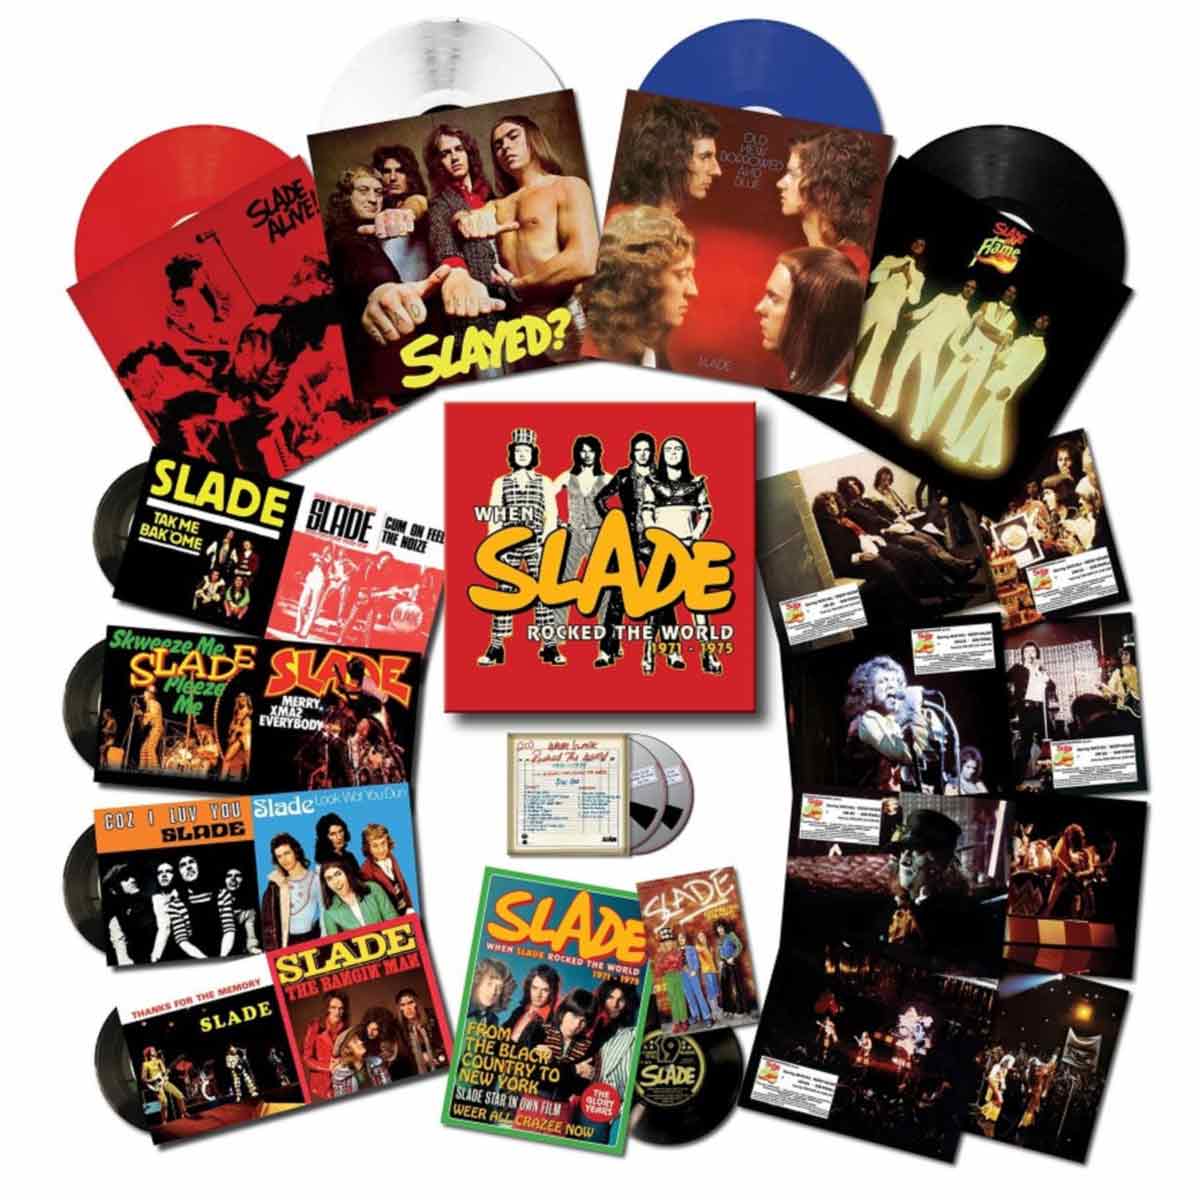 SLADE "when slade rocked the world 1971-1975 - Special Edition